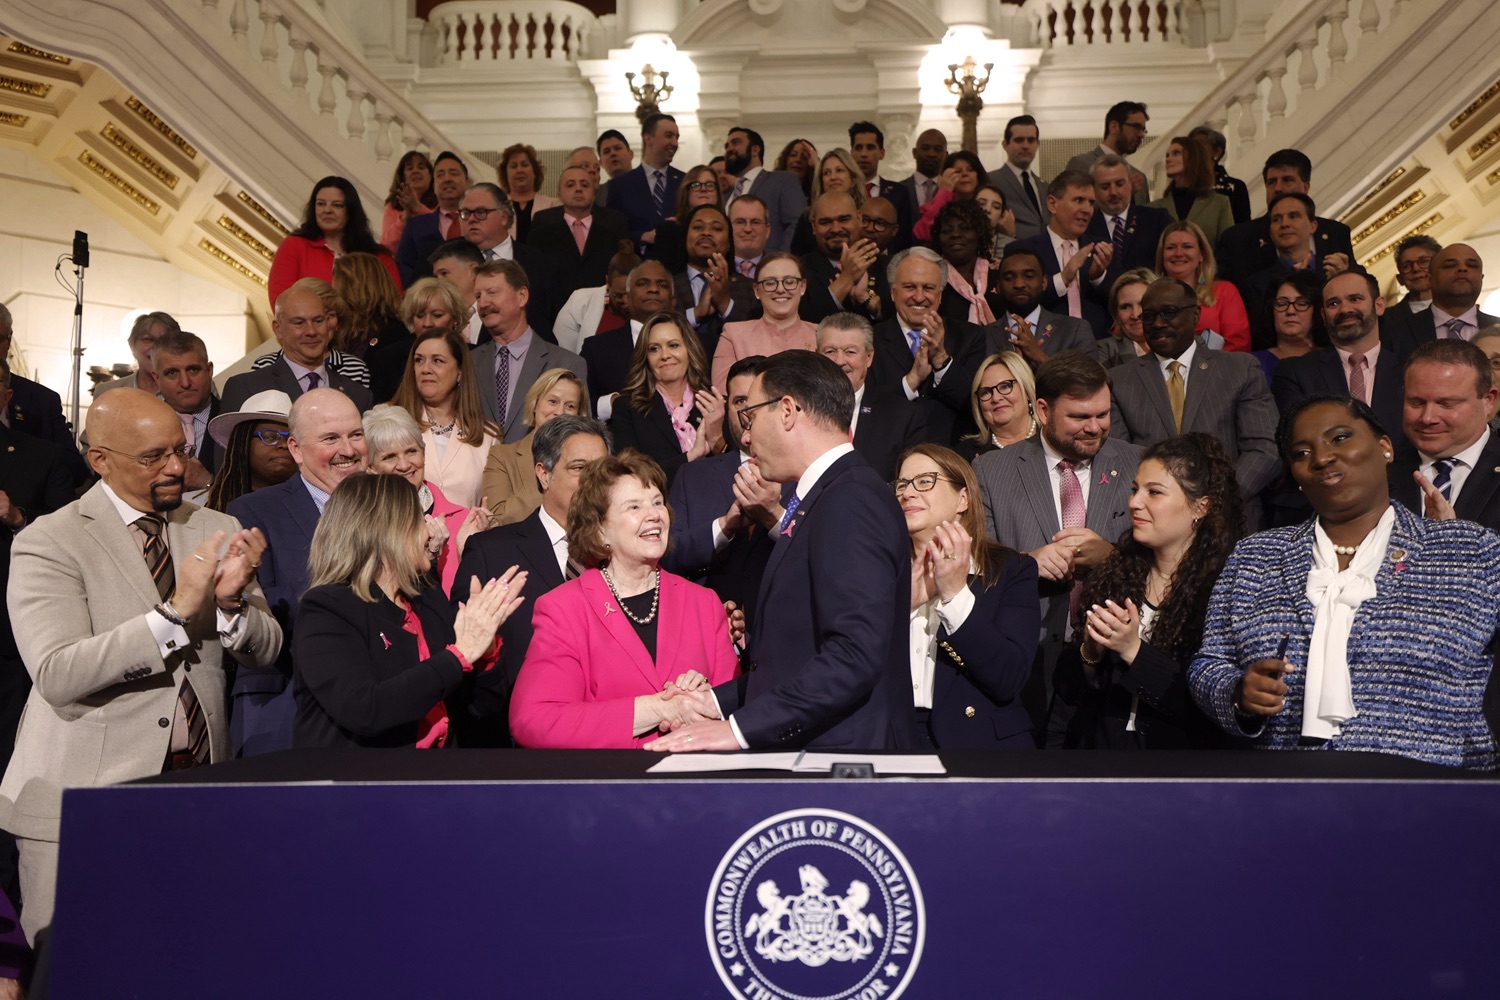 Governor Josh Shapiro signed the first bill of his Administration - Act 1 of 2023, a first-of-its-kind law in the nation that will require insurers to cover preventive breast and ovarian cancer screenings for high-risk women at no cost. MAY 01, 2023 - HARRISBURG, PA<br><a href="https://filesource.amperwave.net/commonwealthofpa/photo/23041_gov_sb8_dz_023.JPG" target="_blank">⇣ Download Photo</a>